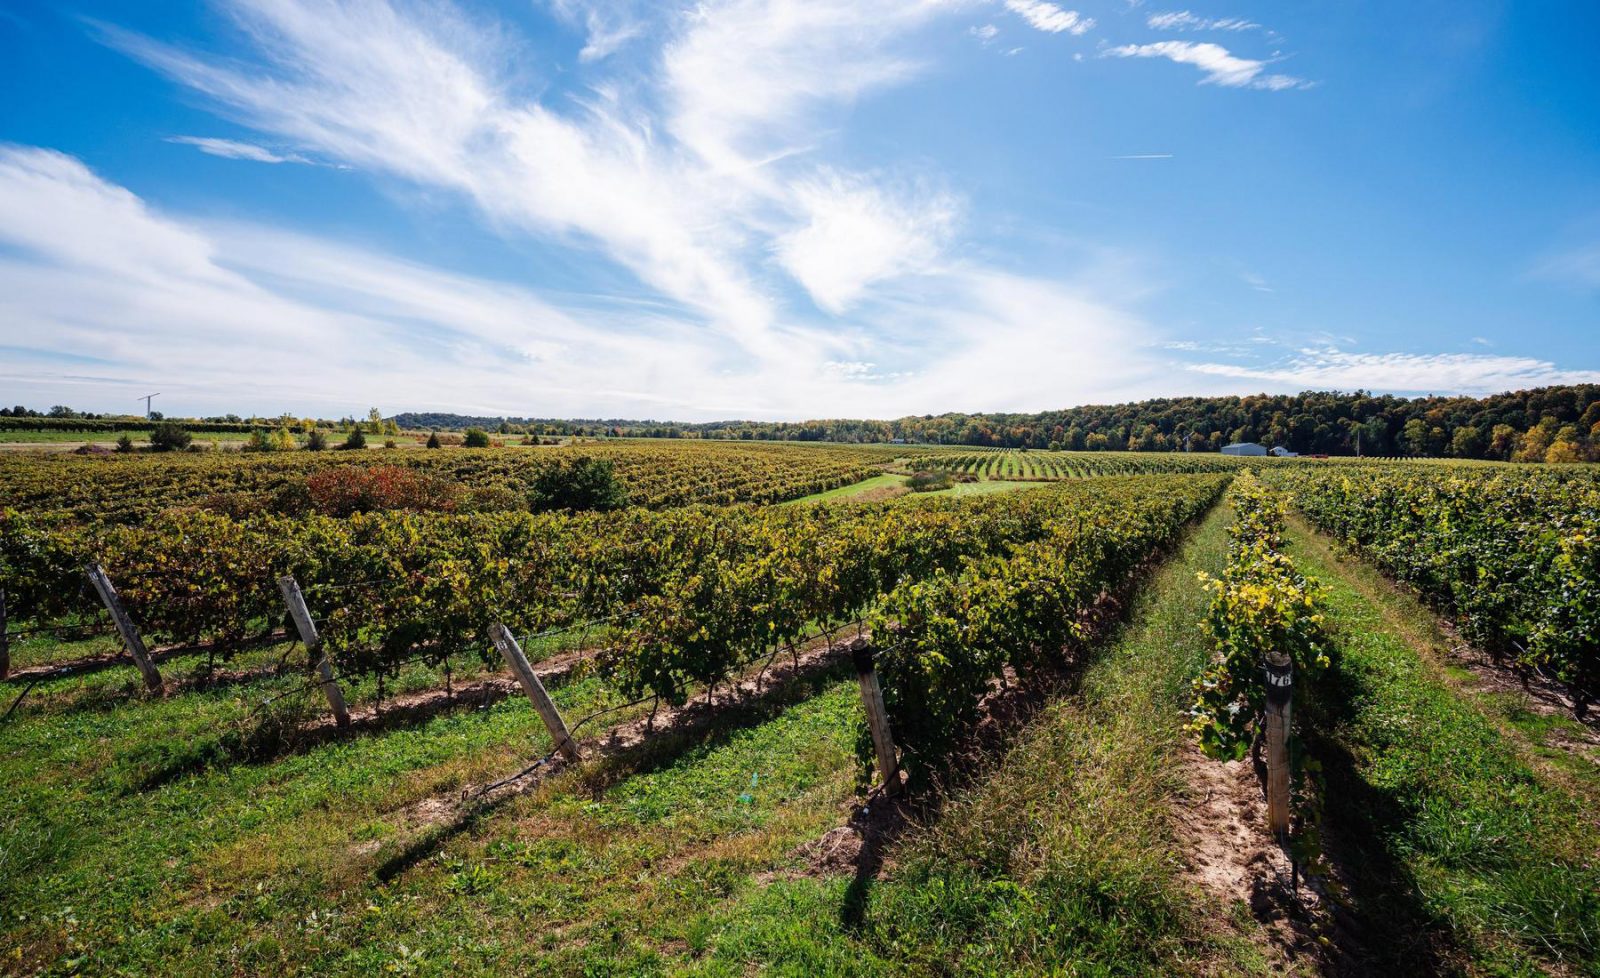 A vineyard flourishing with rows of lush grapevines and green grass under a bright blue sky with mottling of wispy cotton-like white clouds.